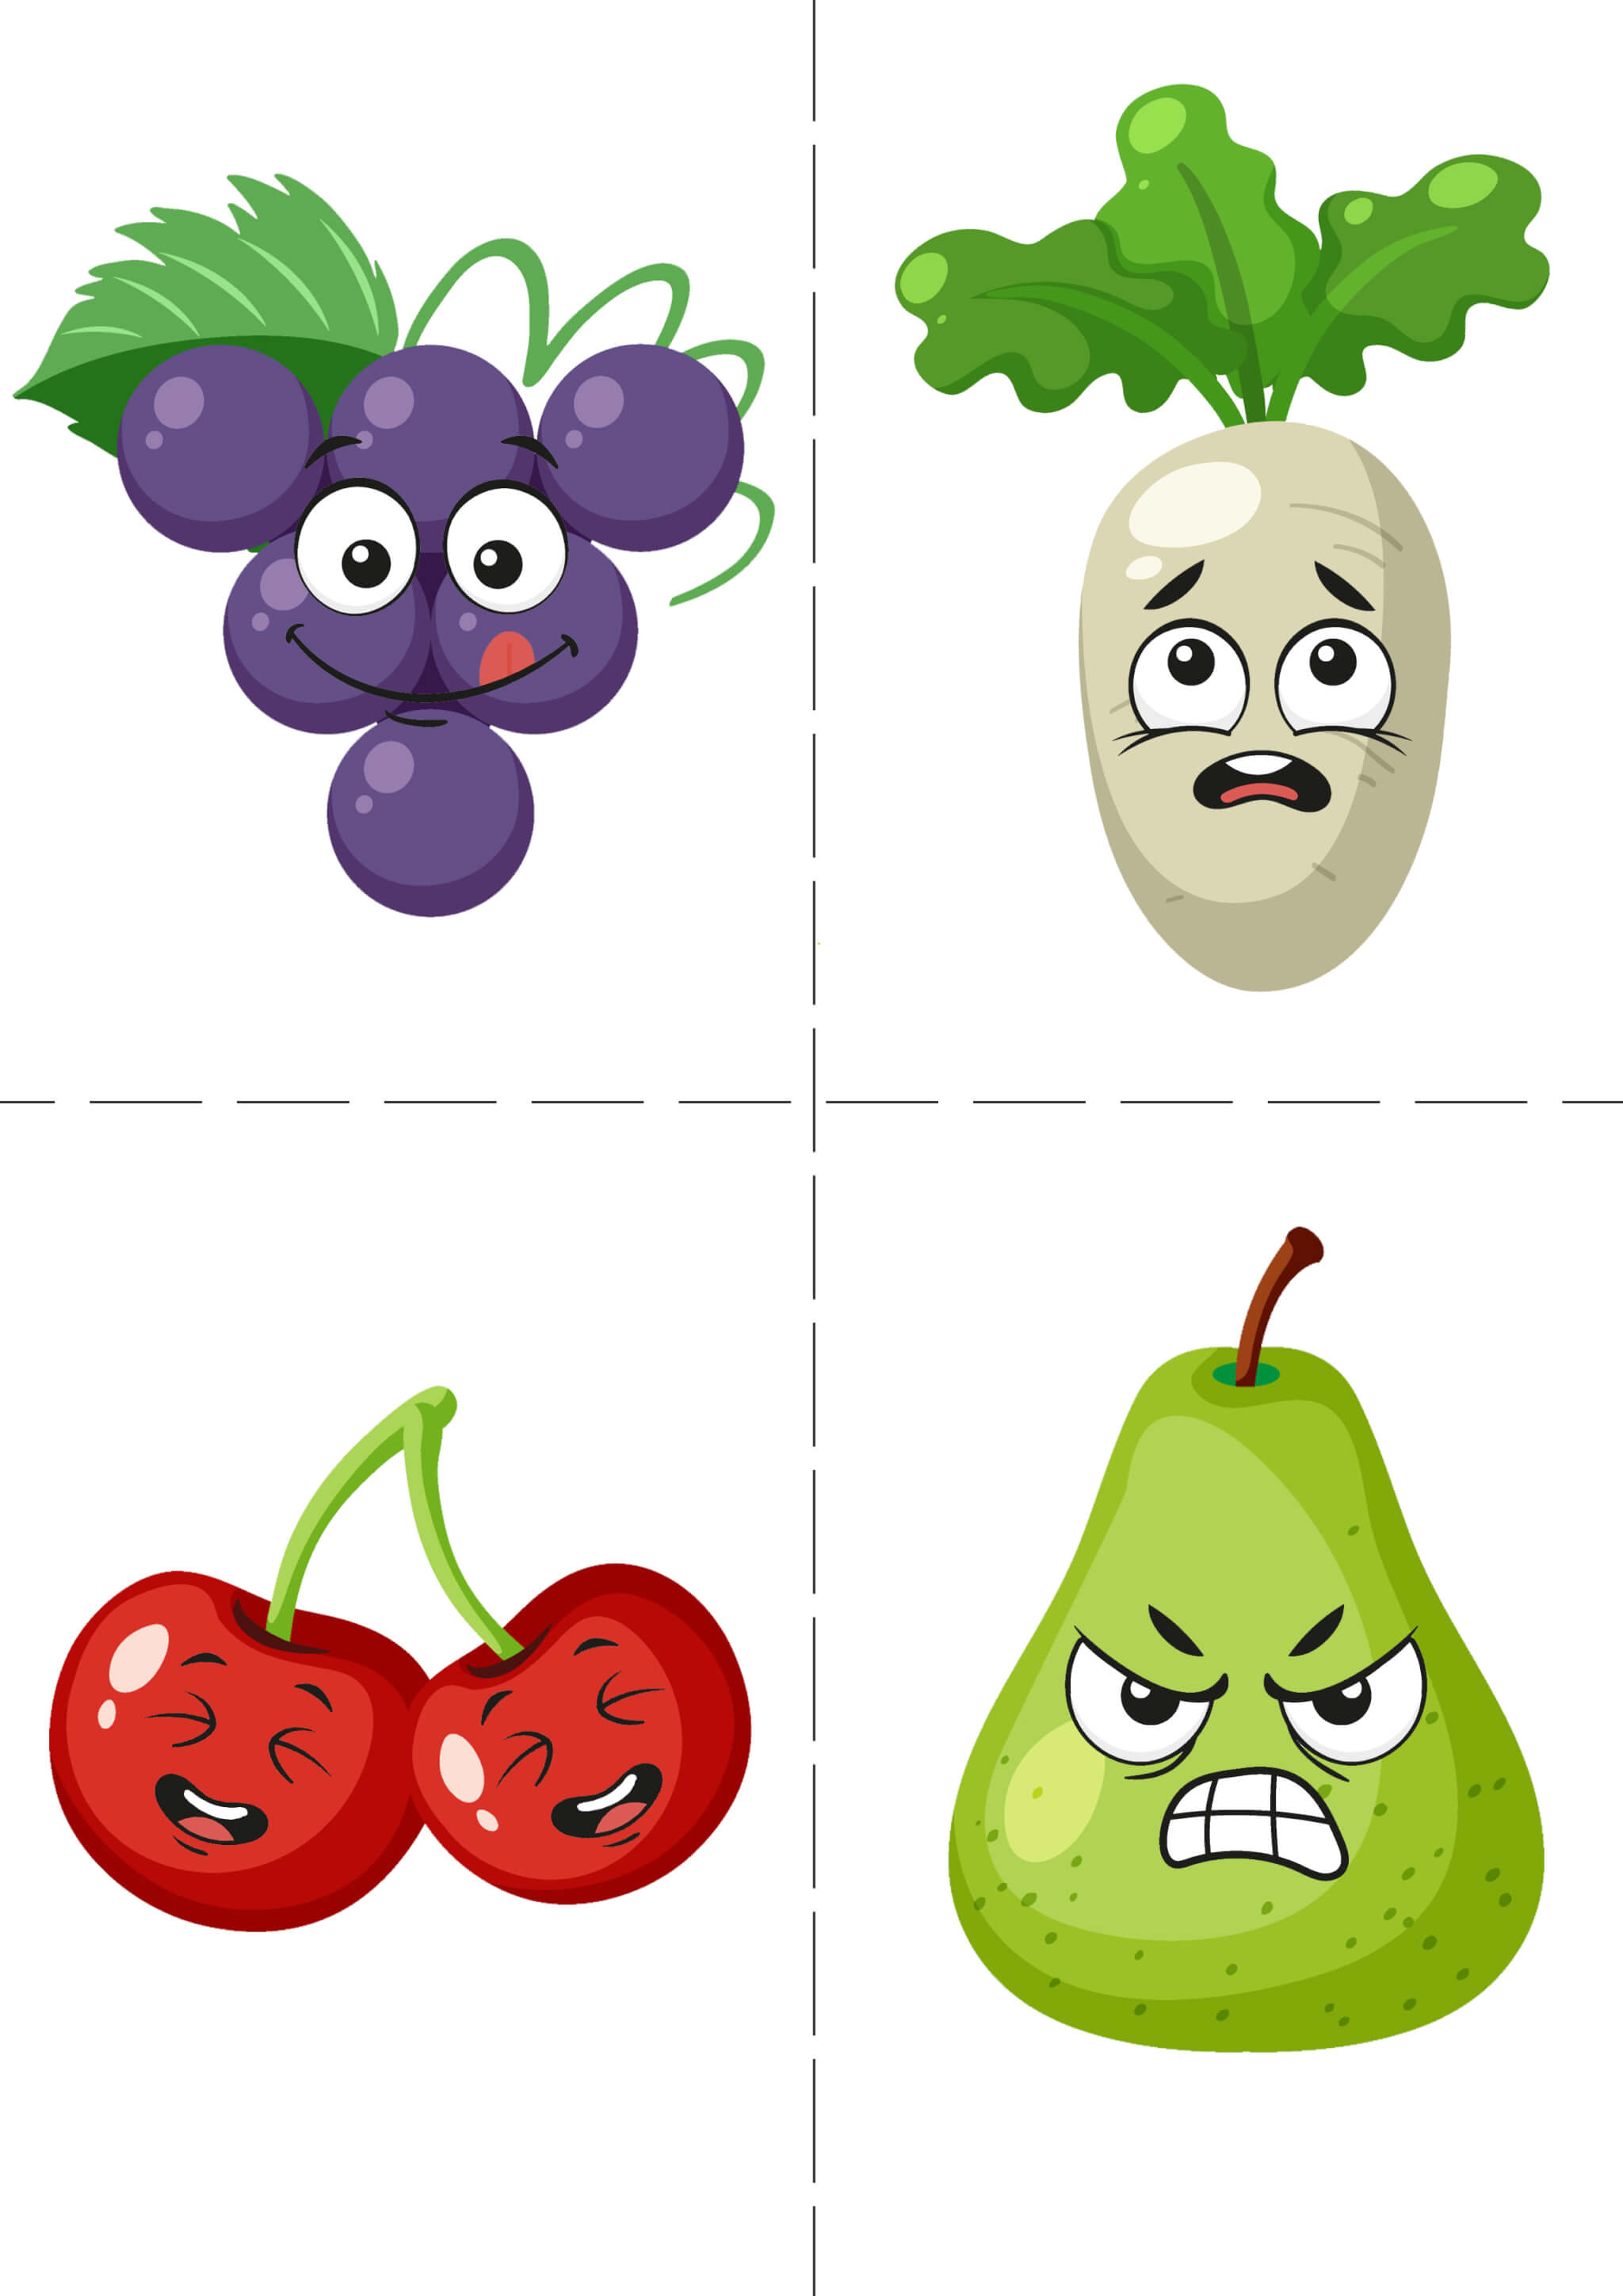 Fruits and Vegetables Emotions Flashcards - Image 5